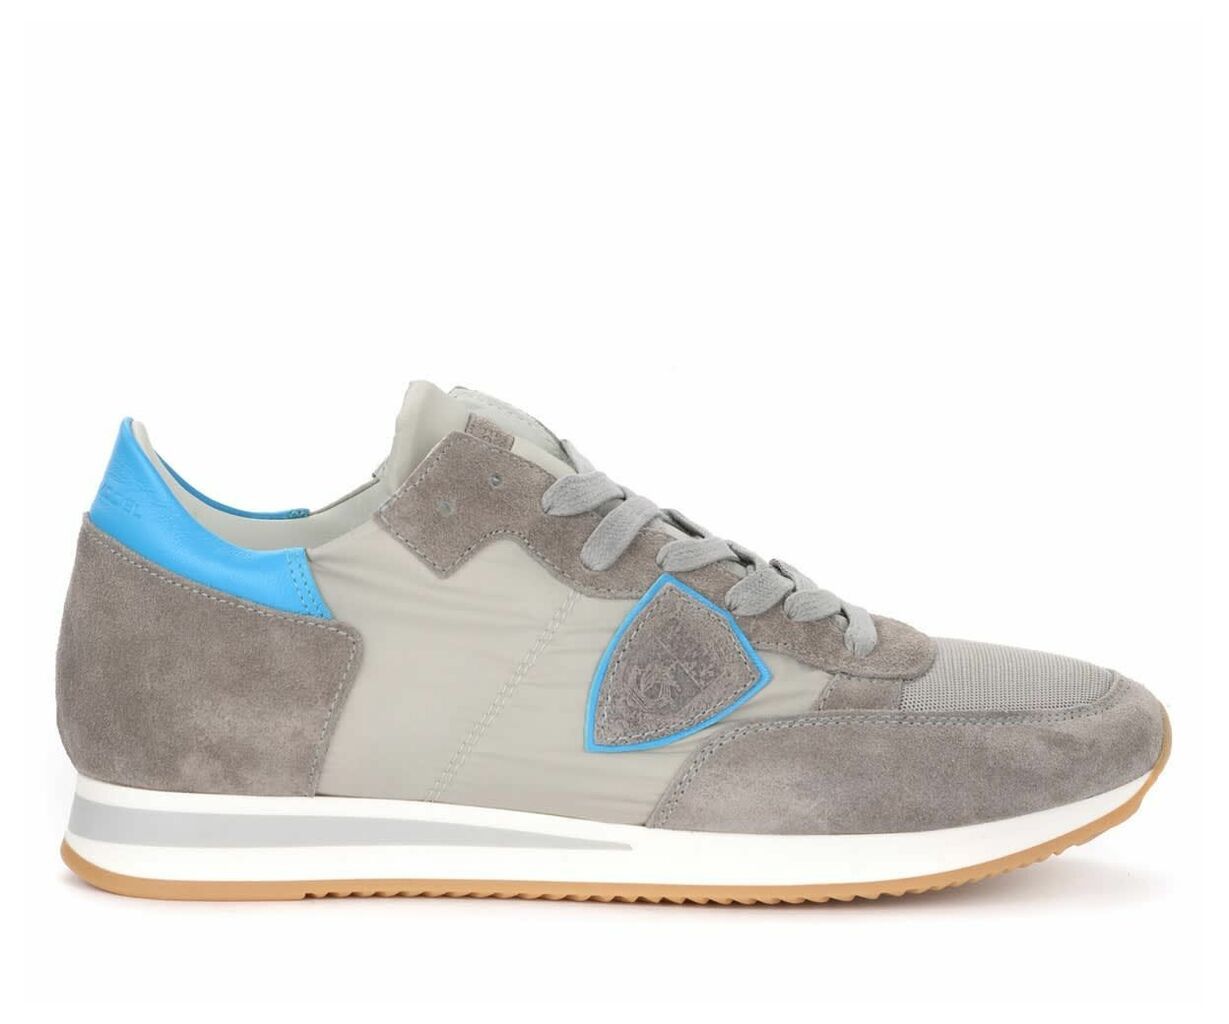 Tropez Sneaker In Suede And Gray Fabric With Light Blue Spoiler